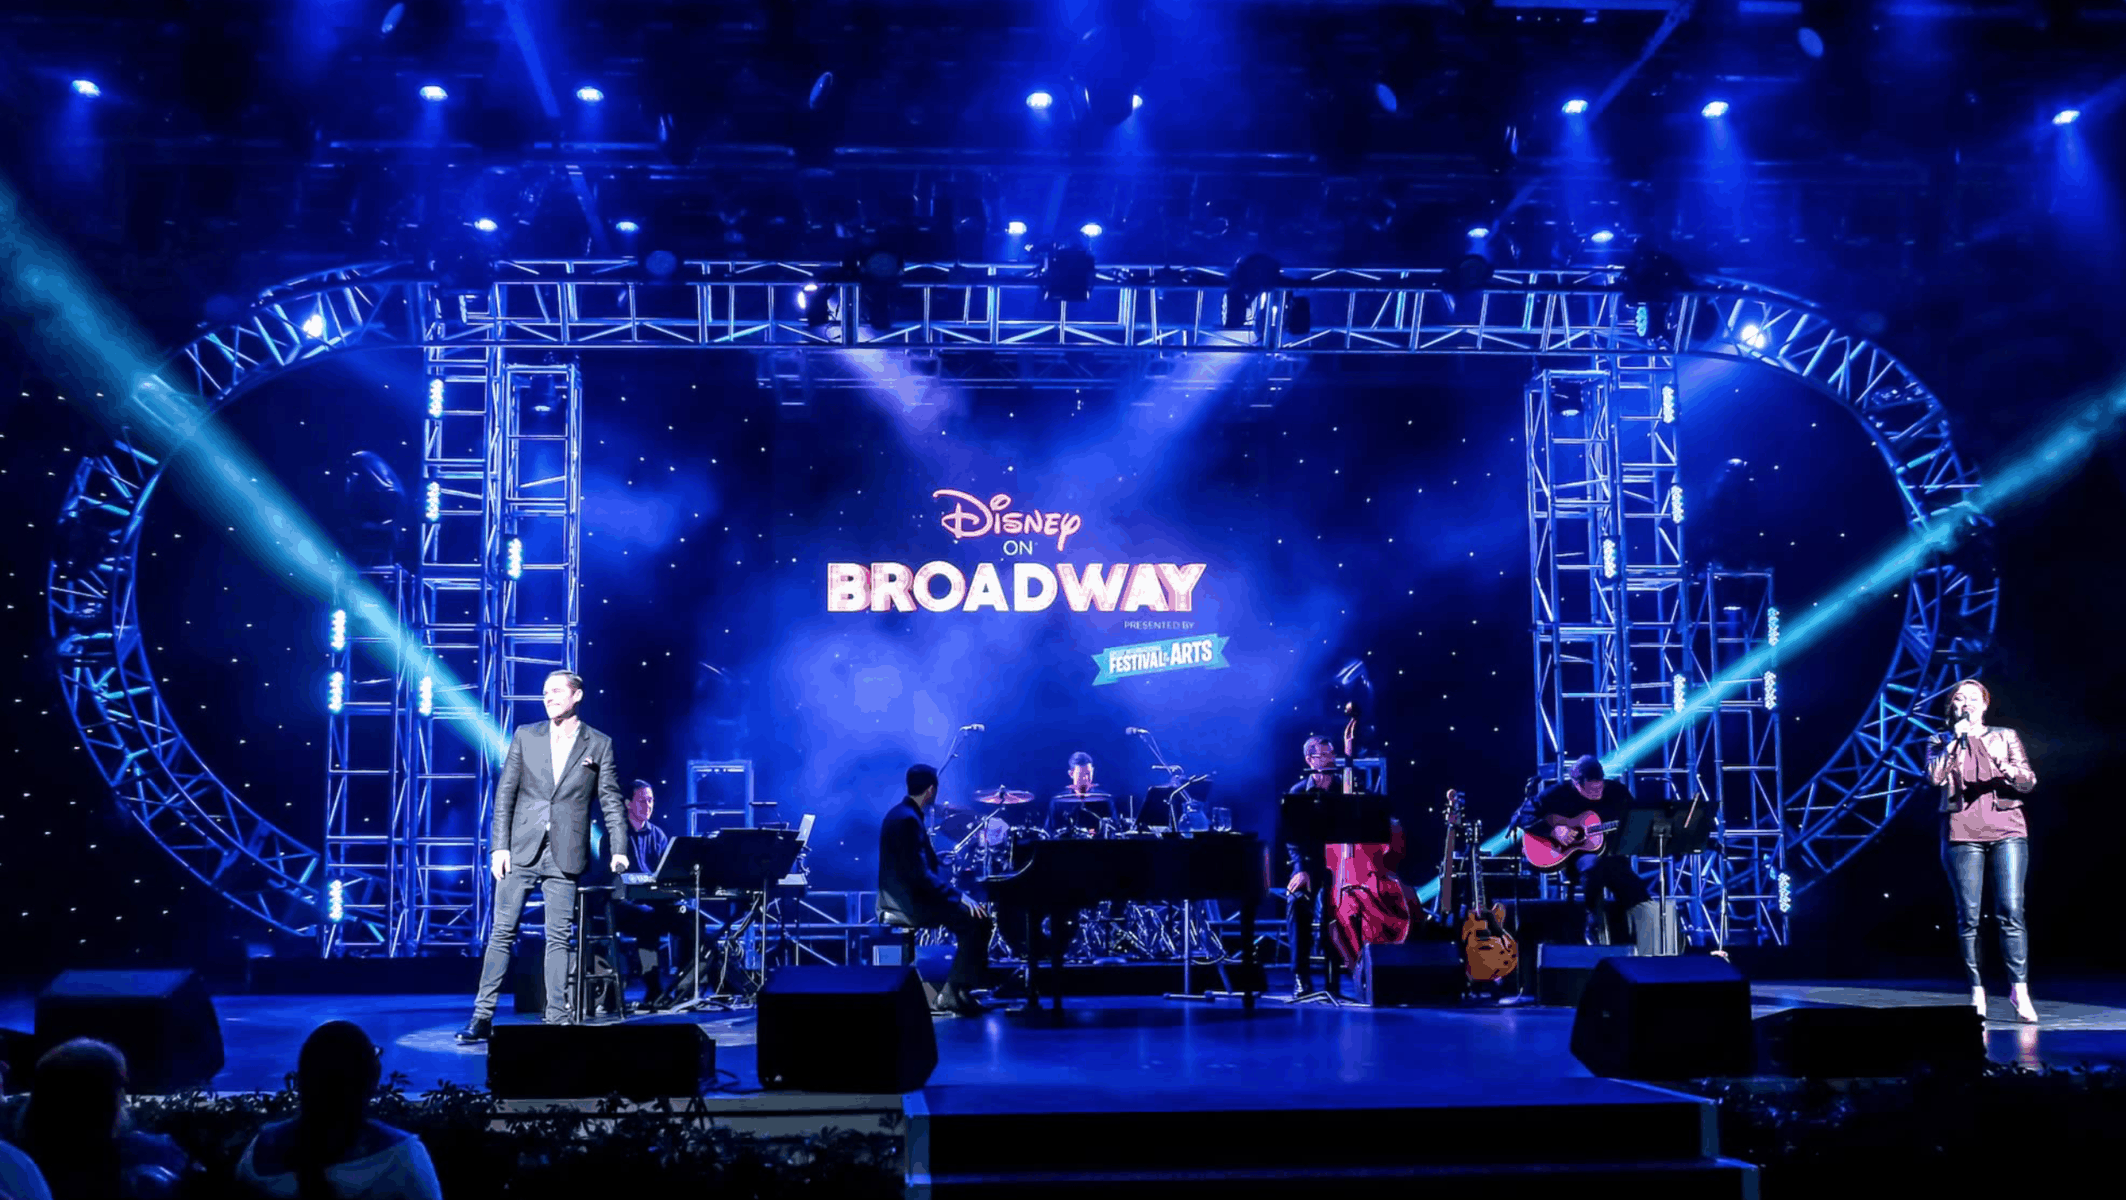 Disney on Broadway Concert Series at Epcot's Festival of the Arts